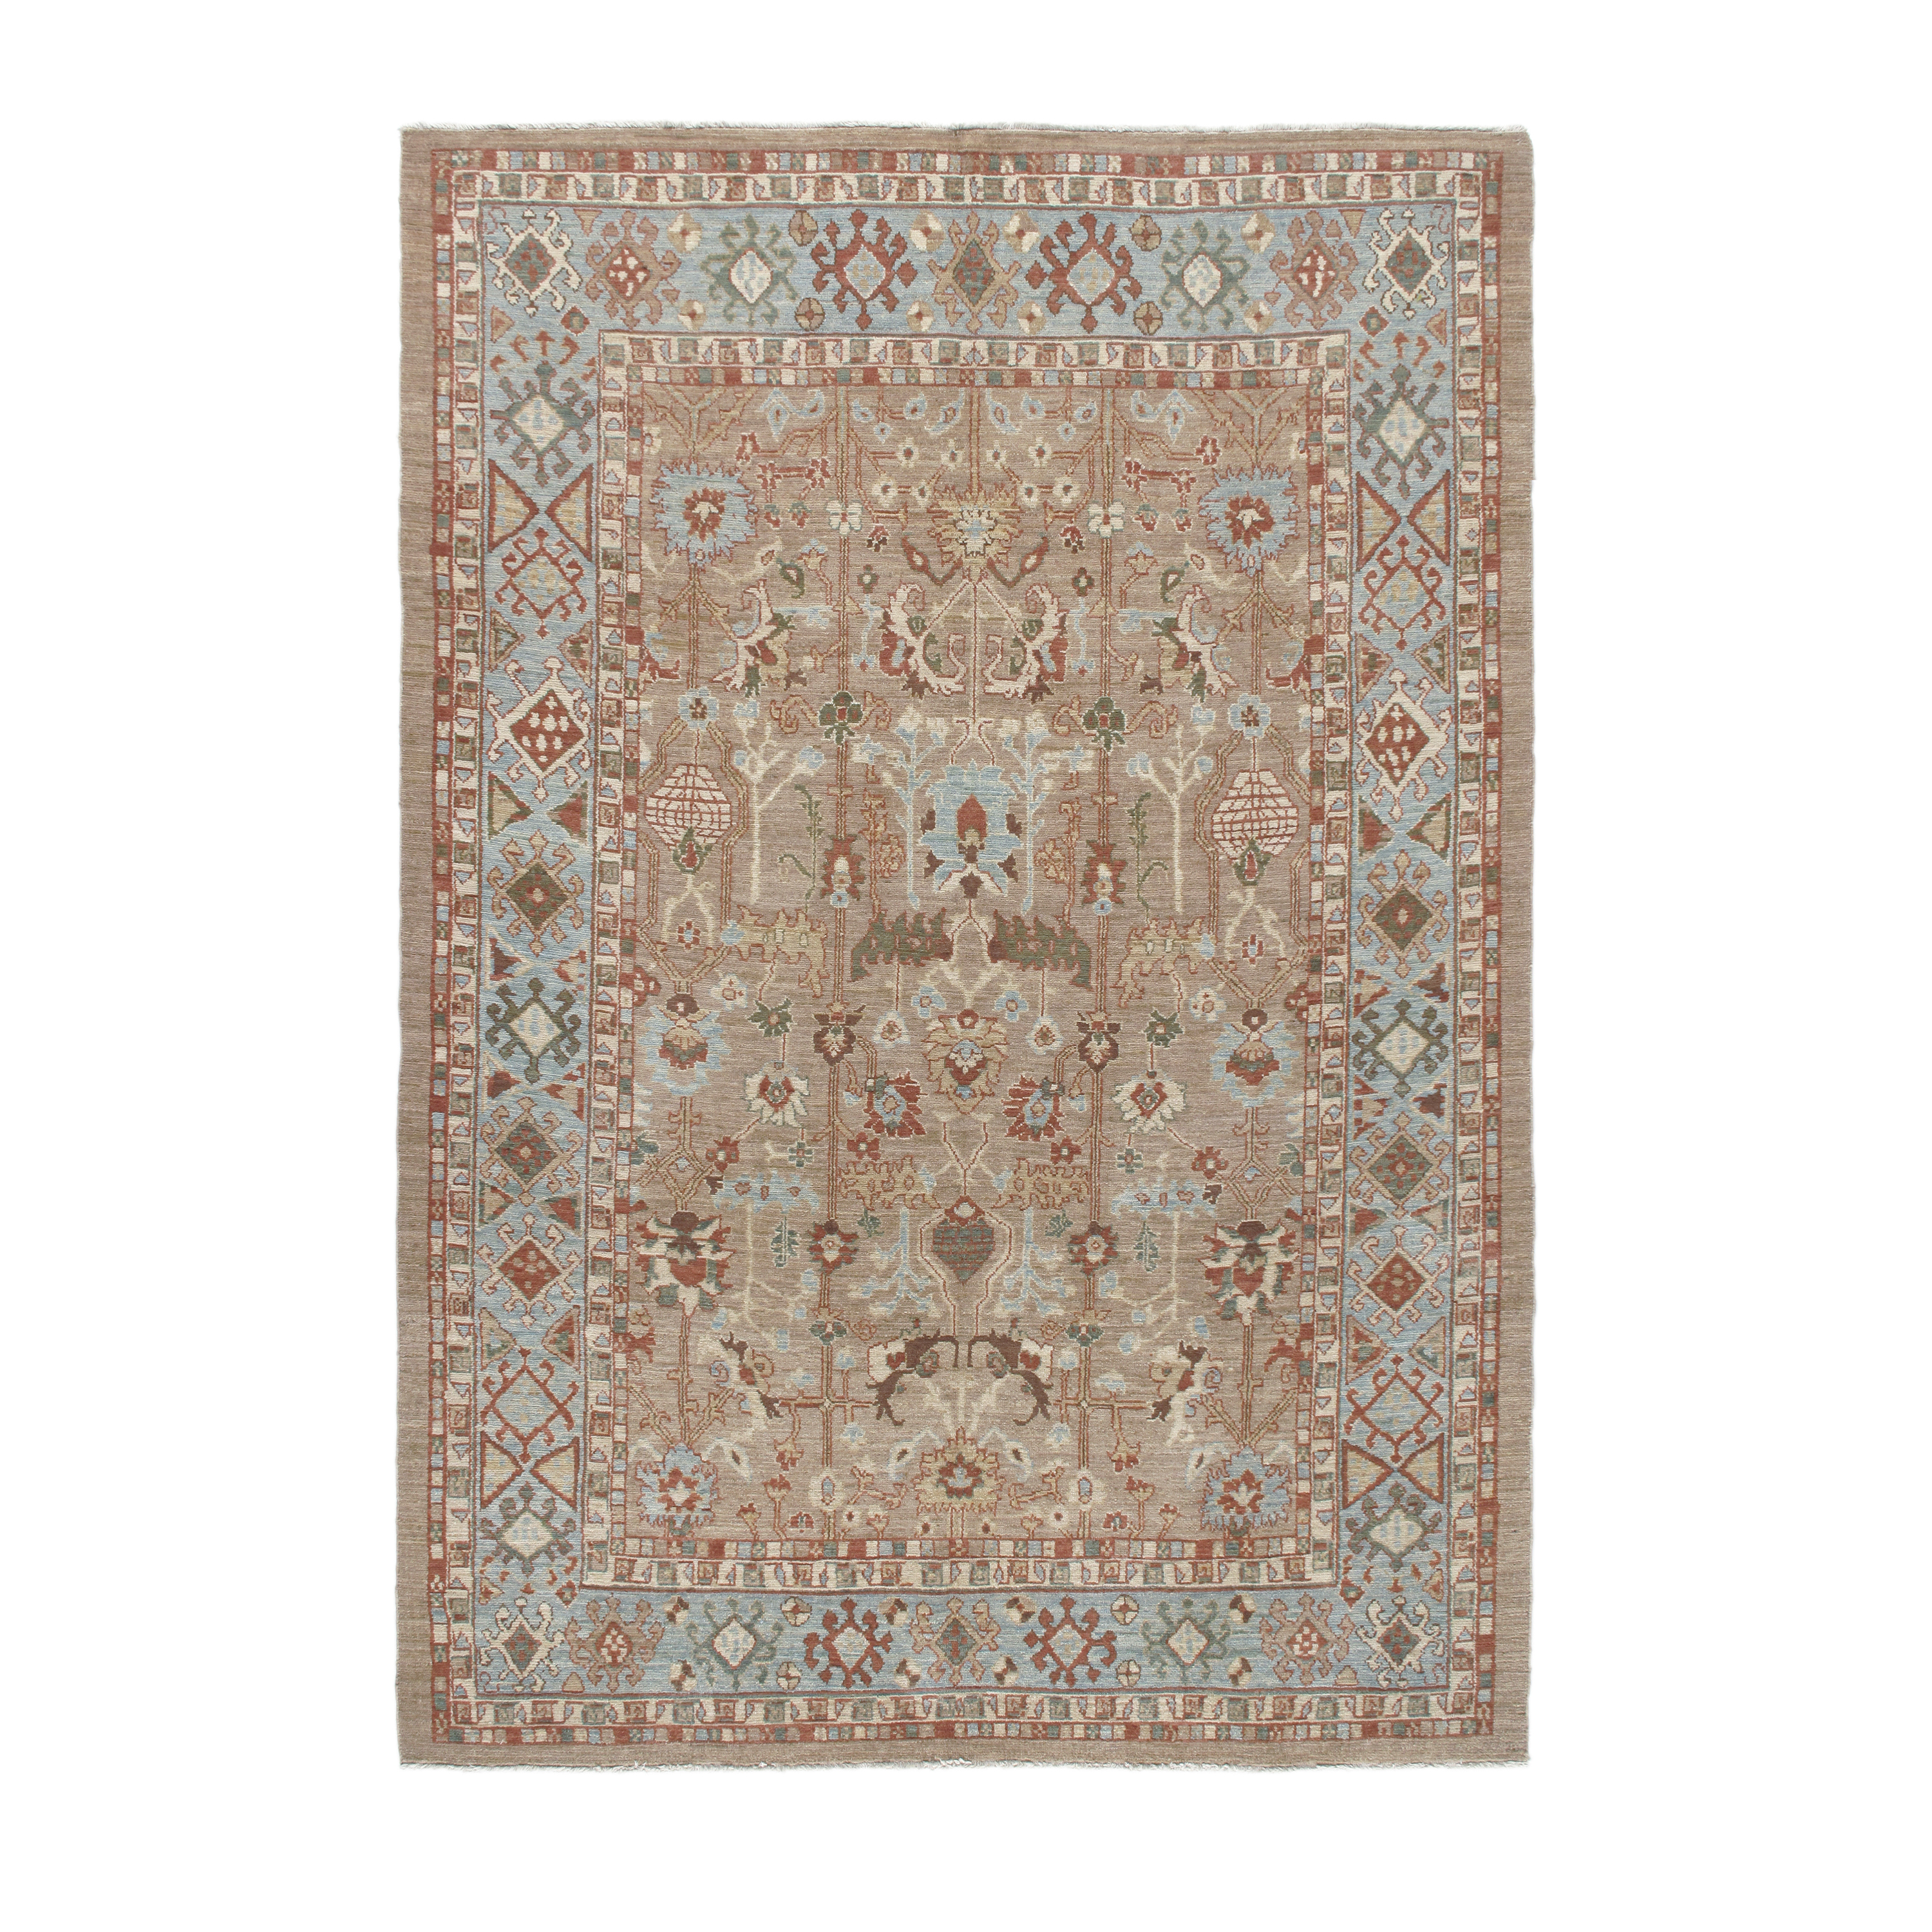 This Persian Bakshaish Rug is hand-carded Persian wool and natural dyes.